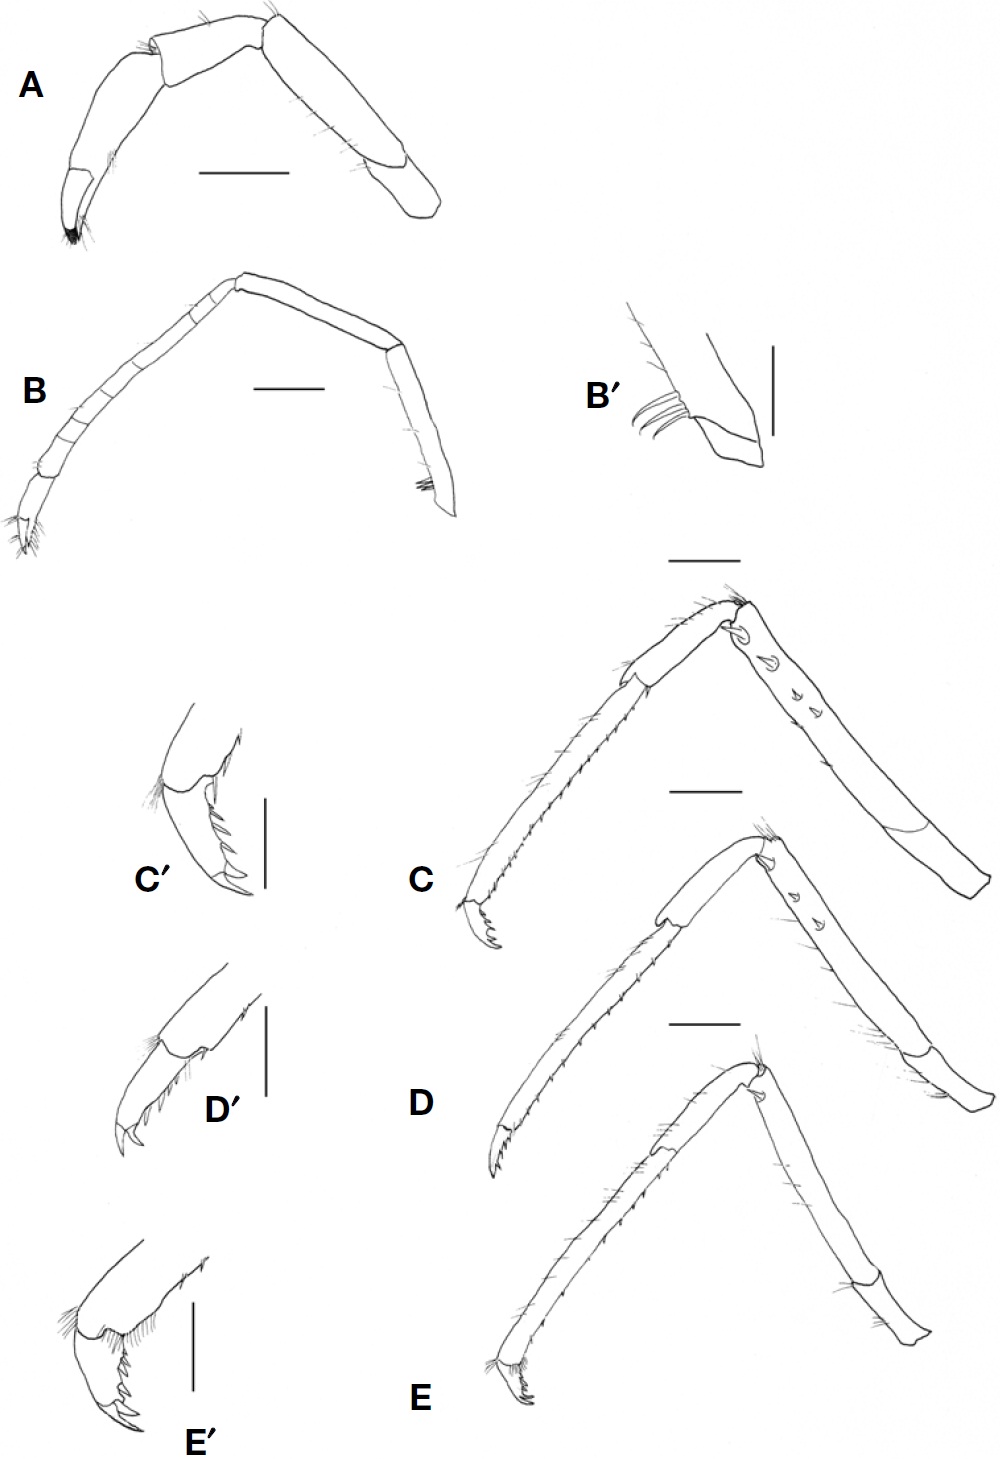 Lebbeus speciosus, male (postorbital carapace length 5.9 mm). A, Left First pereopod, lateral; B, Left Second pereopod, lateral; B′, Setae on ischium of second pereopod, proximal; C, Left Third pereopod, lateral; C′, Same, Dactylus; D, Left Fourth pereopod, lateral; D′, Same, Dactylus; E, Left fifth pereopod, lateral; E′, Same, Dactylus. Scale bars: A-E=1 mm, B′-E′=0.5 mm.